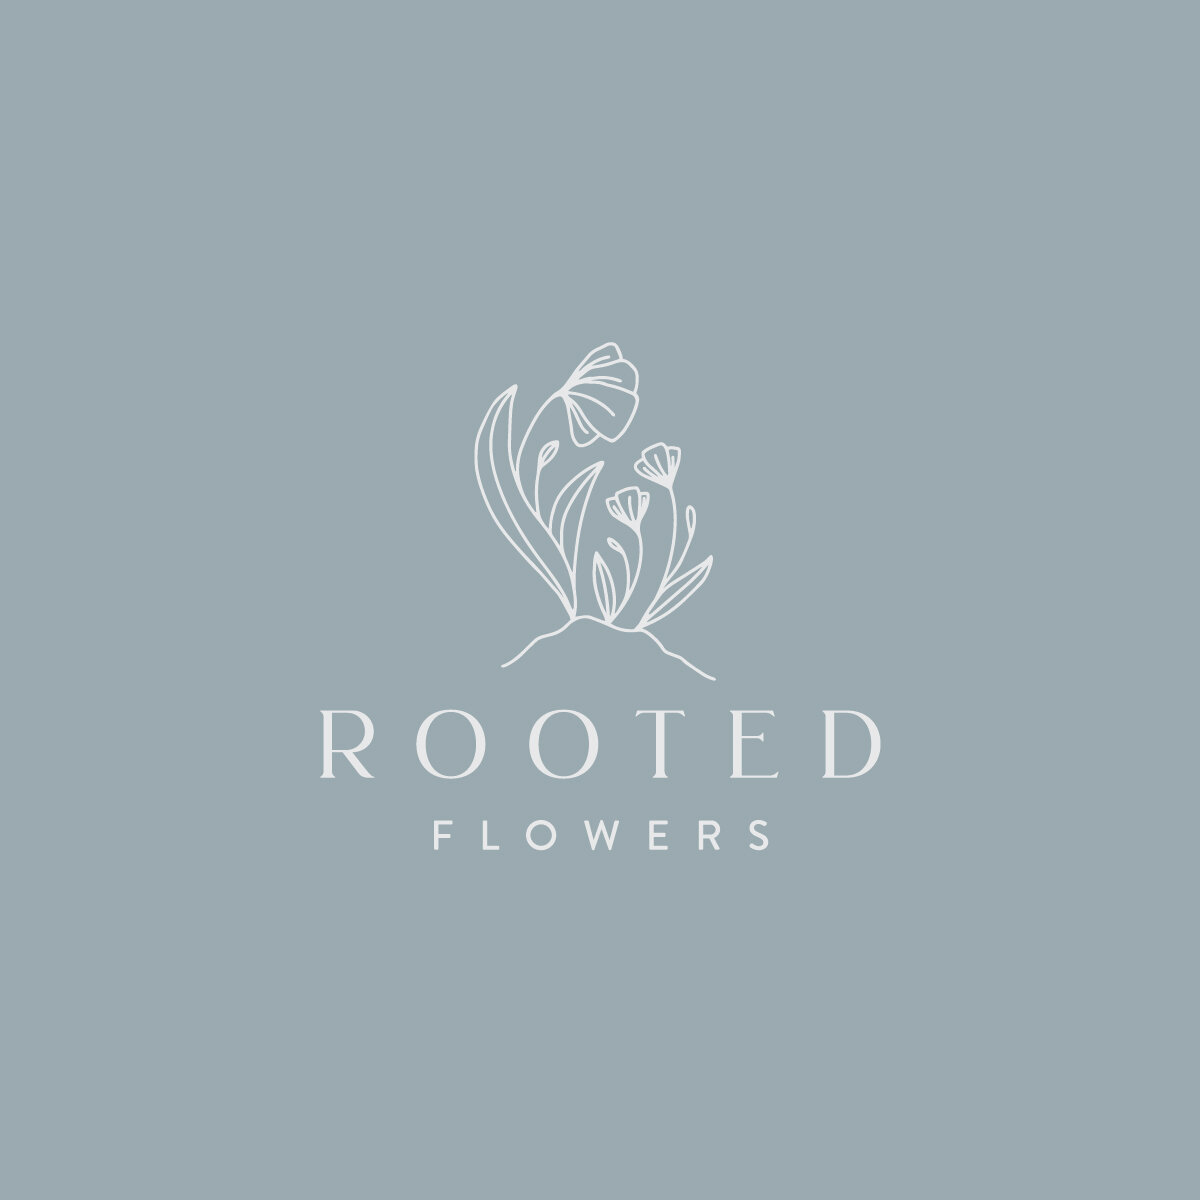 Rooted Flowers Logo - Grey on Blue.jpg